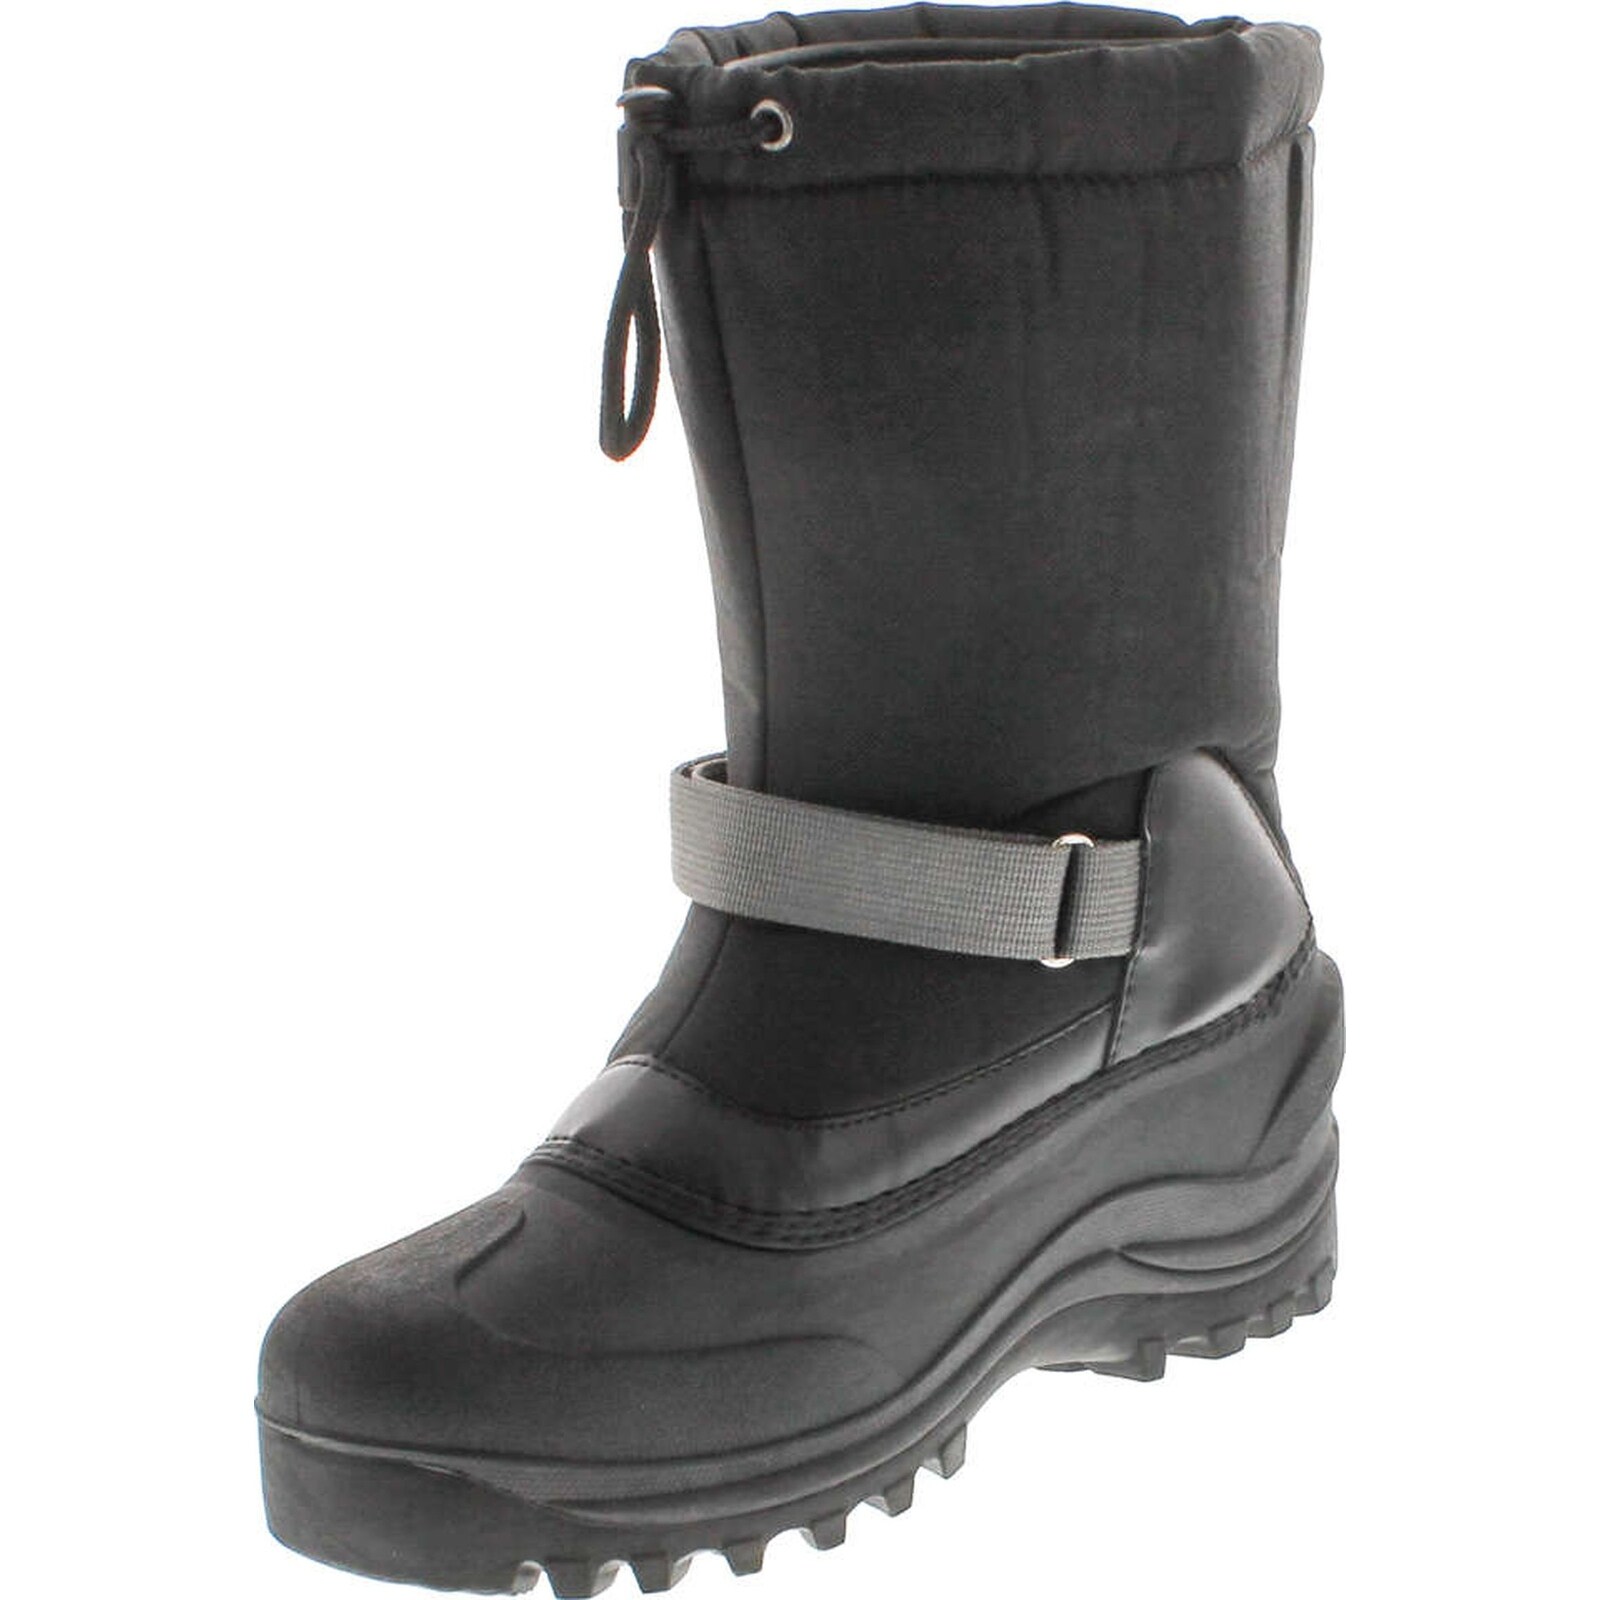 Climate X Mens Ysc5 Snow Boot 